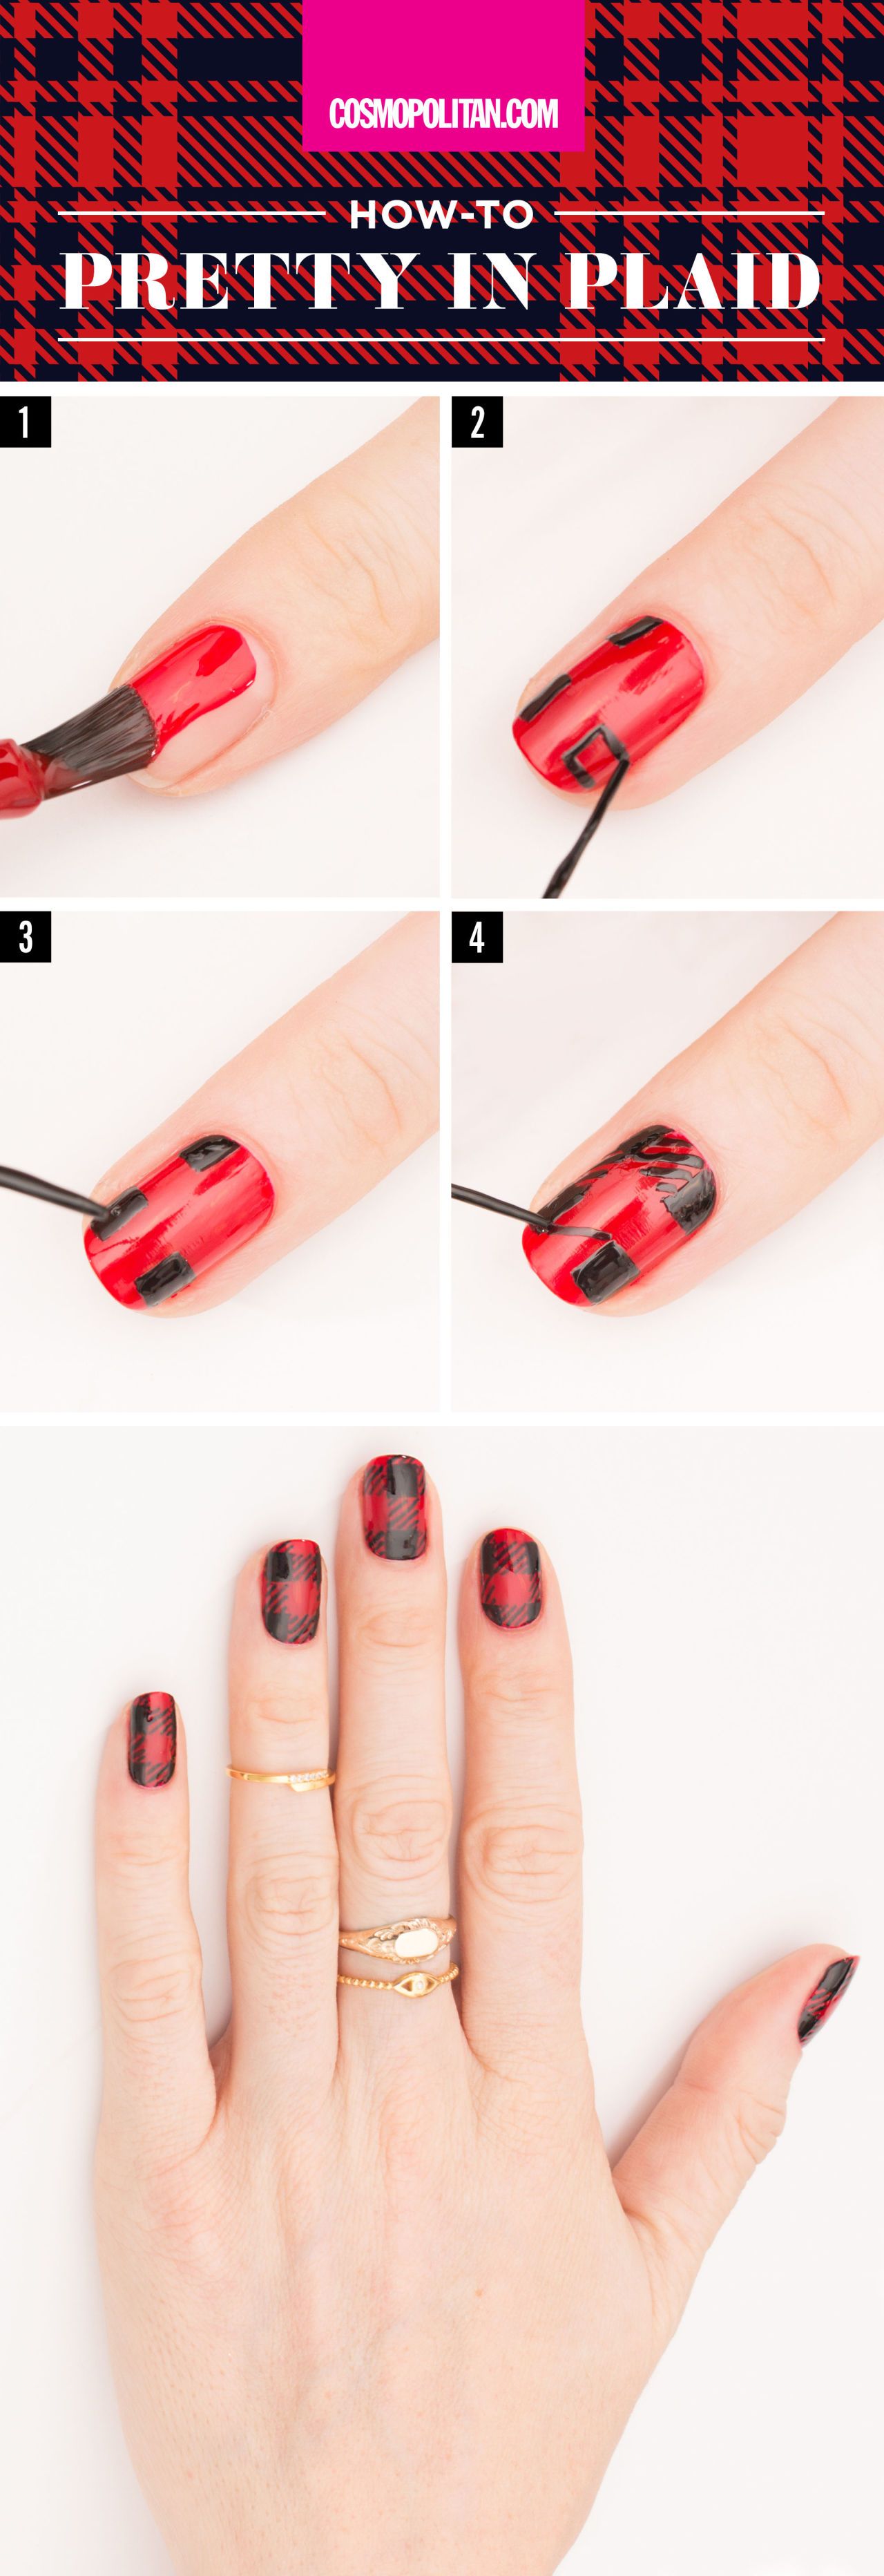 manicure step by step instructions